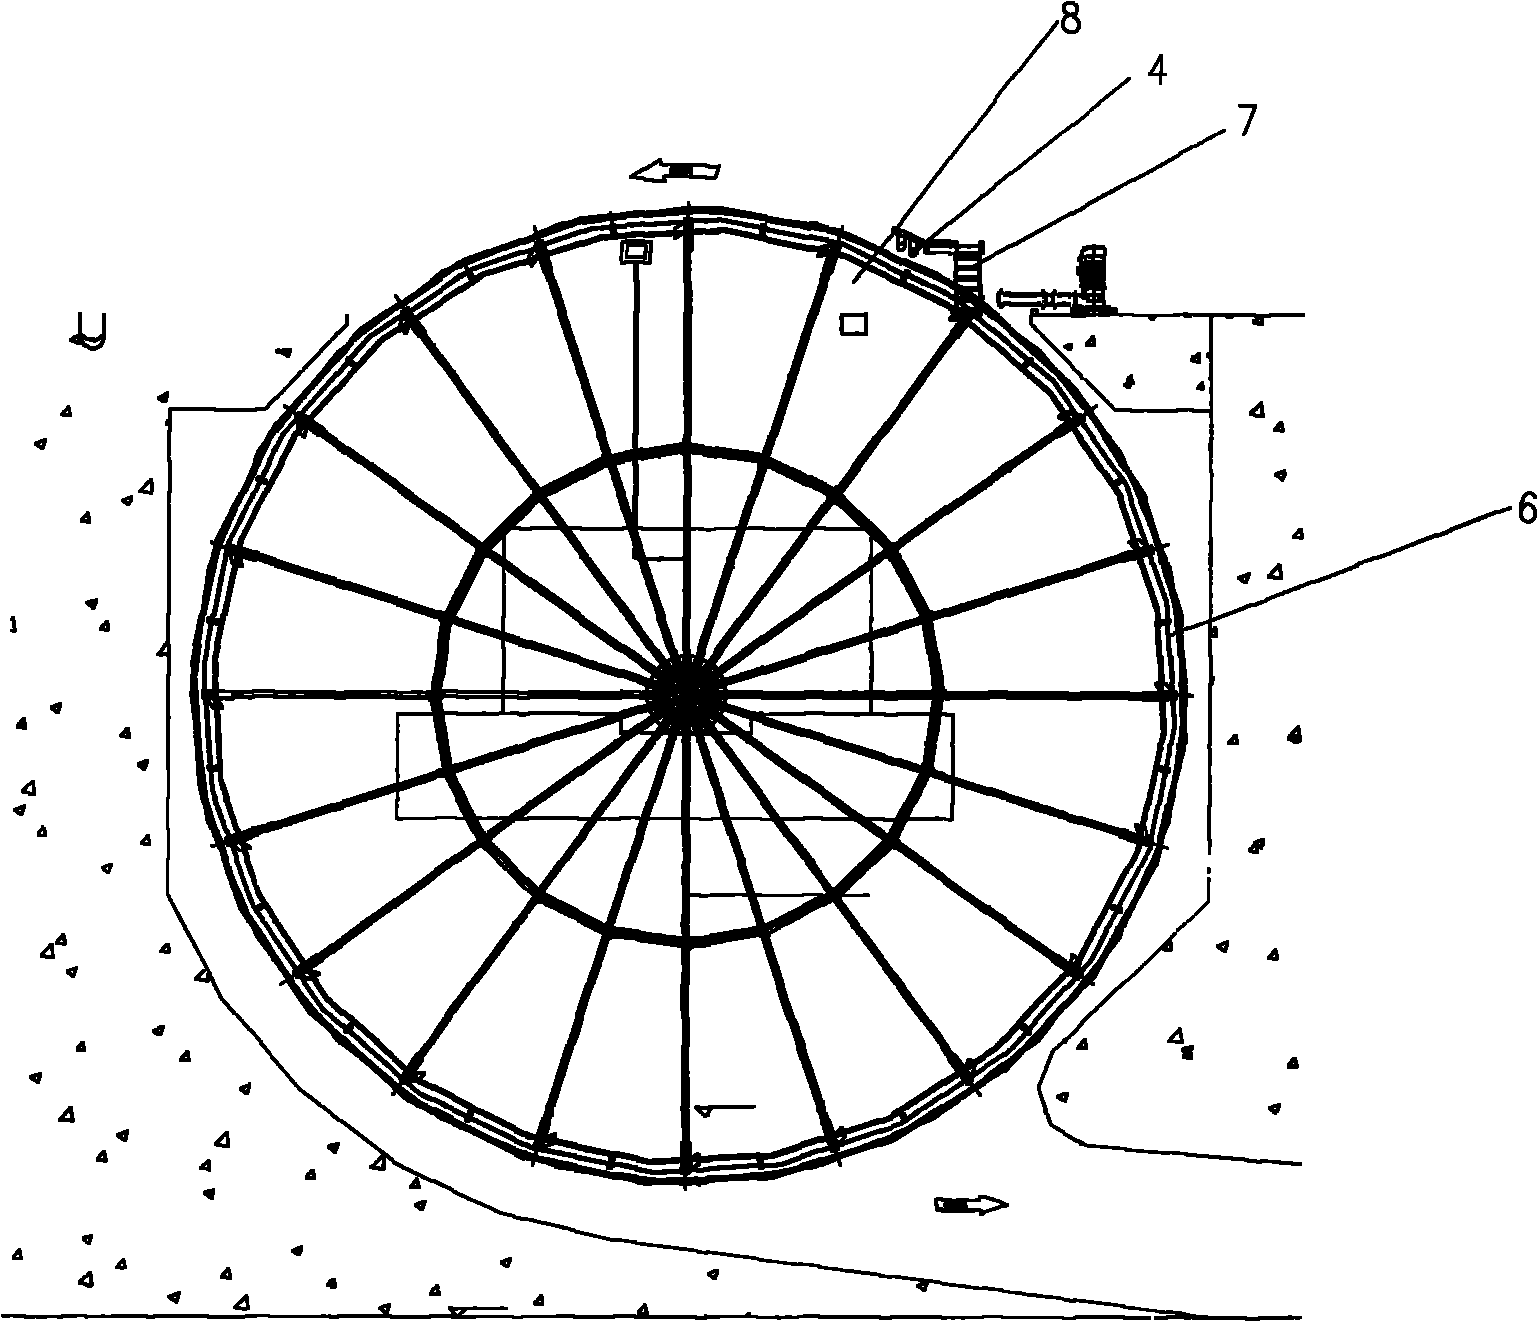 Drum-shaped rotating filter net flushing system of nuclear power plant